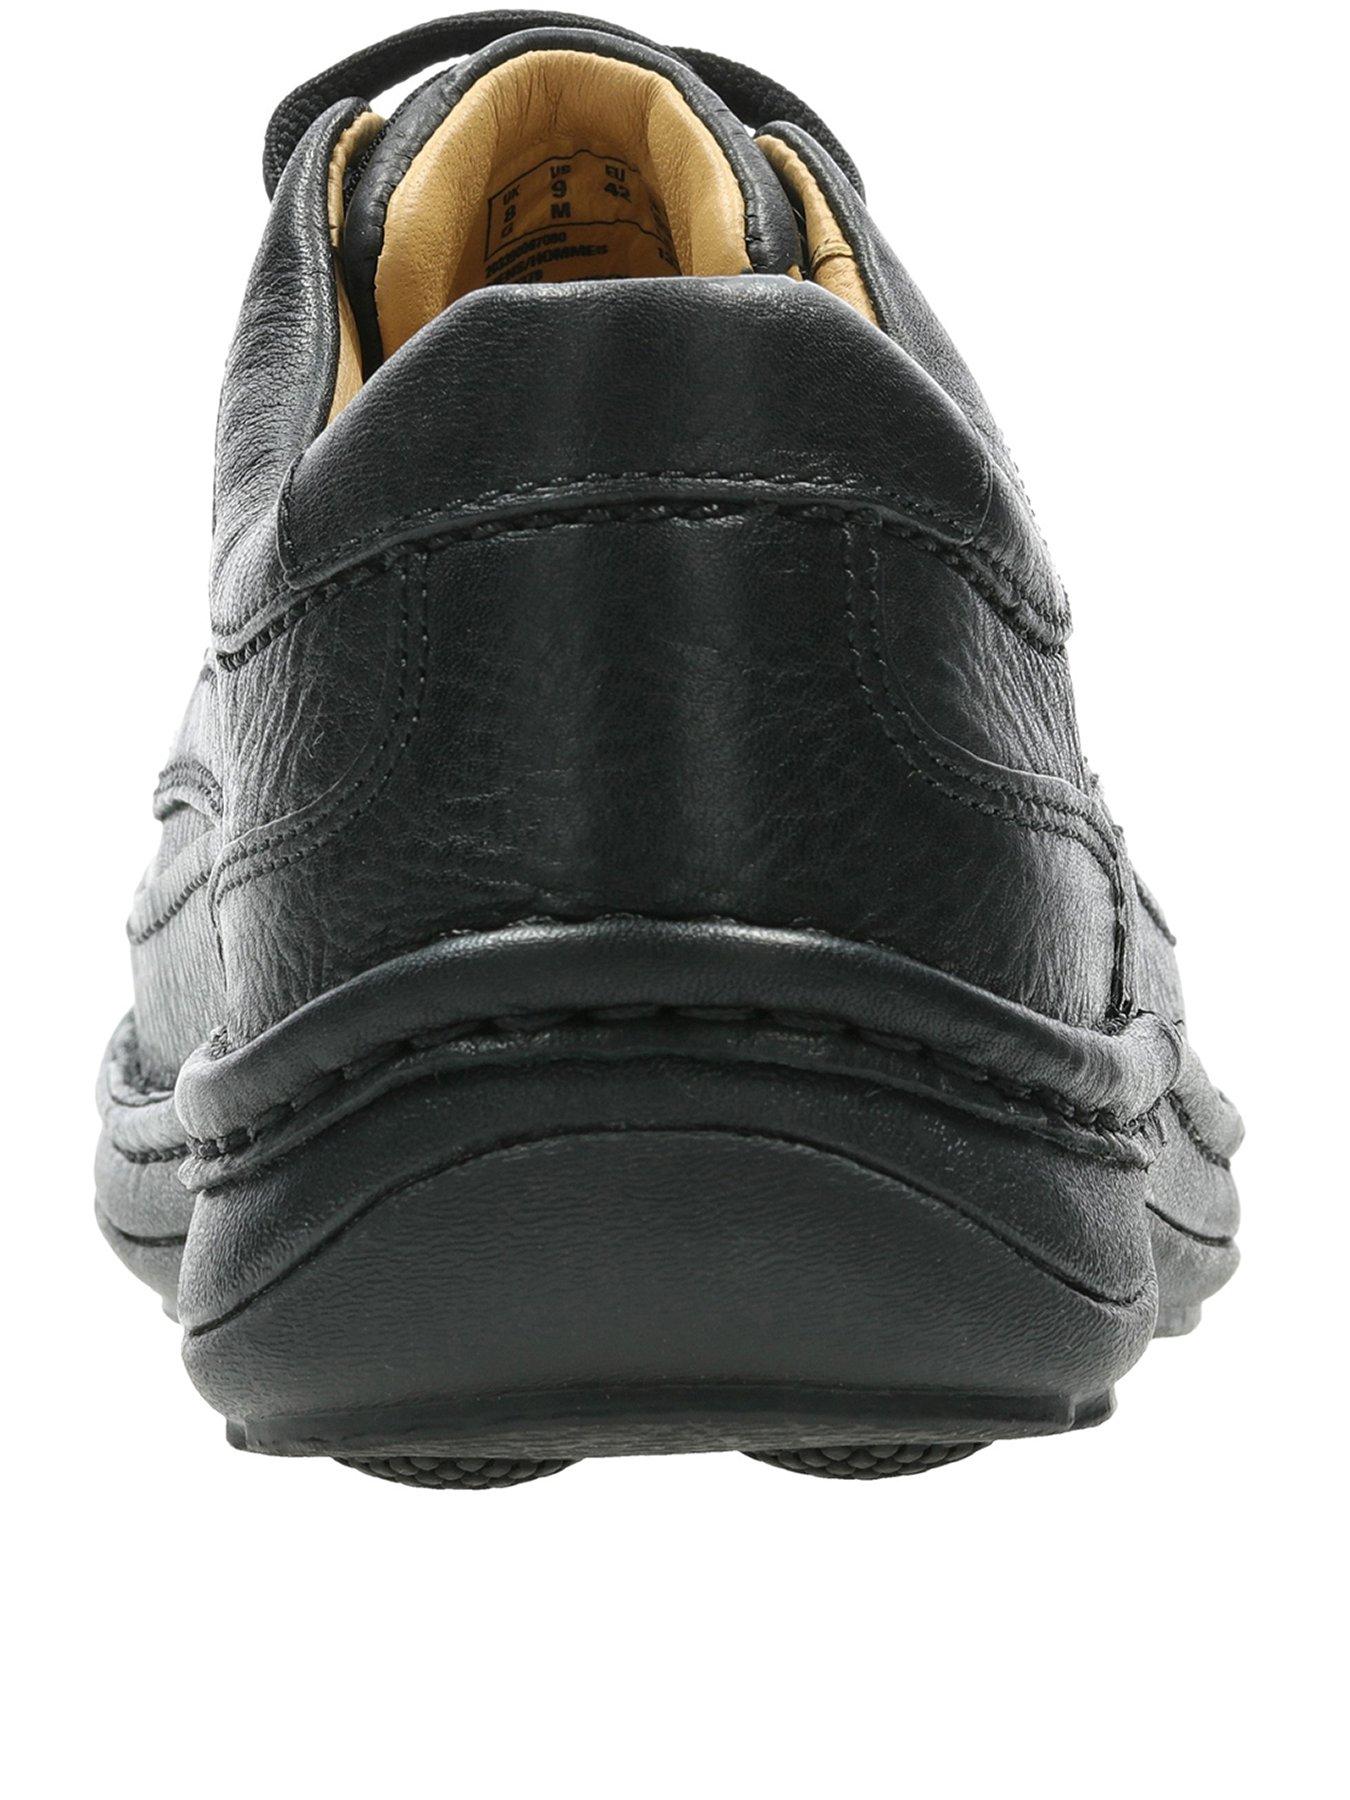 Clarks Nature Three Leather Shoes - Black | very.co.uk